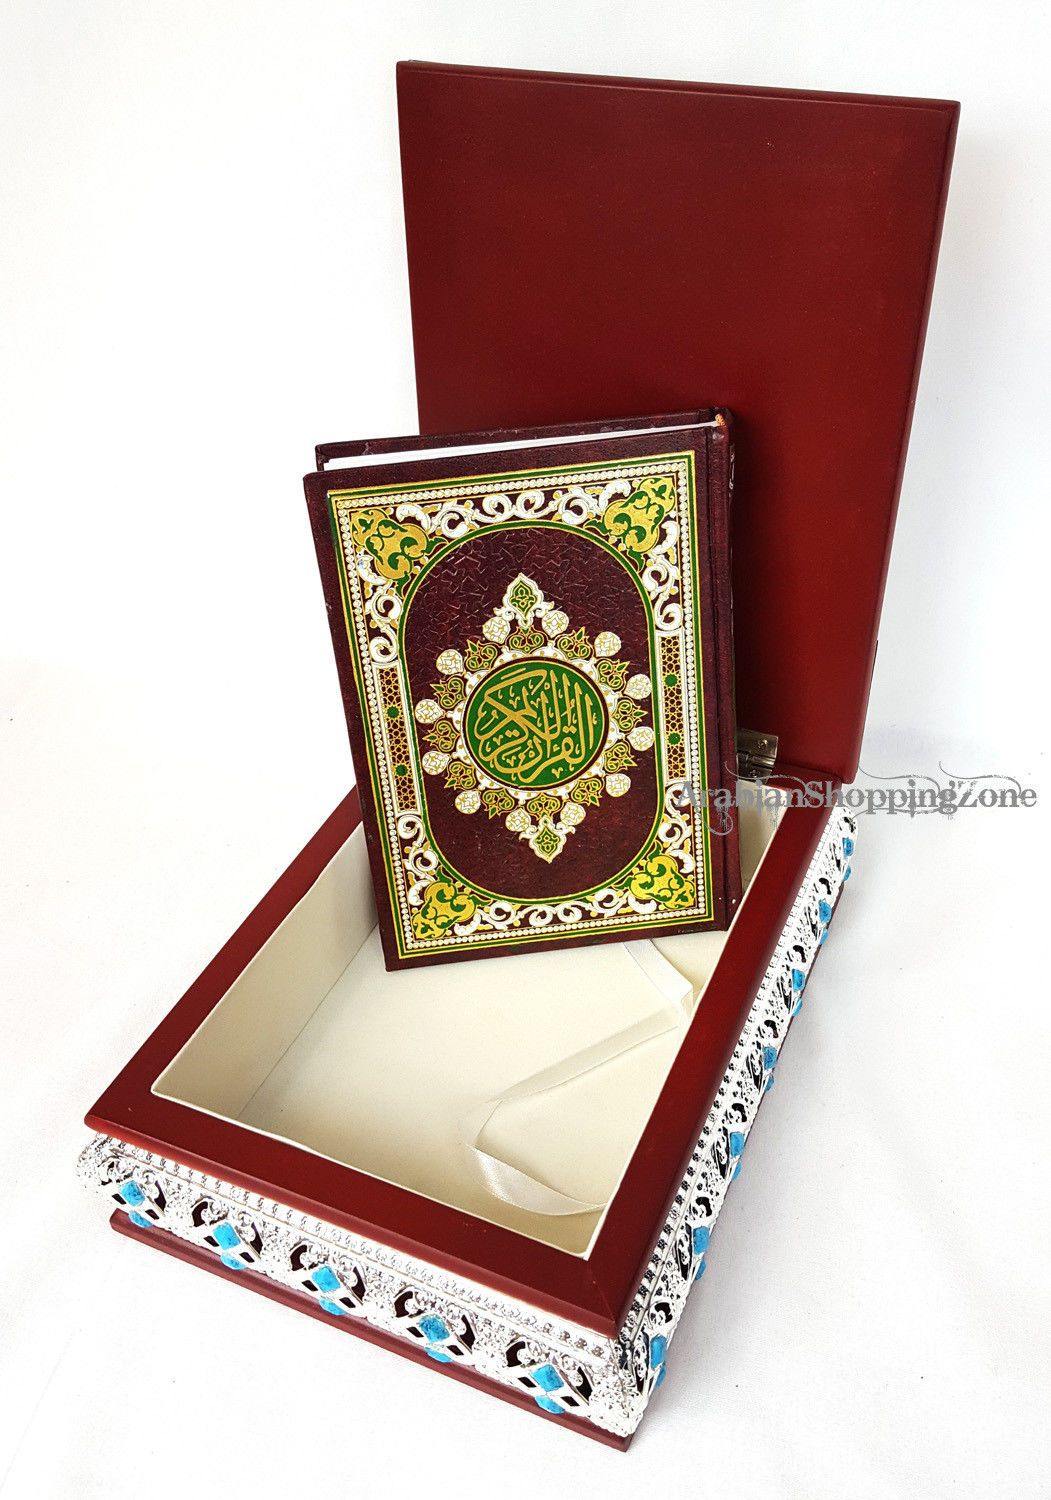 In-crested  Quran Silver Decorated Wooden Storage Box  (2246S) - Arabian Shopping Zone